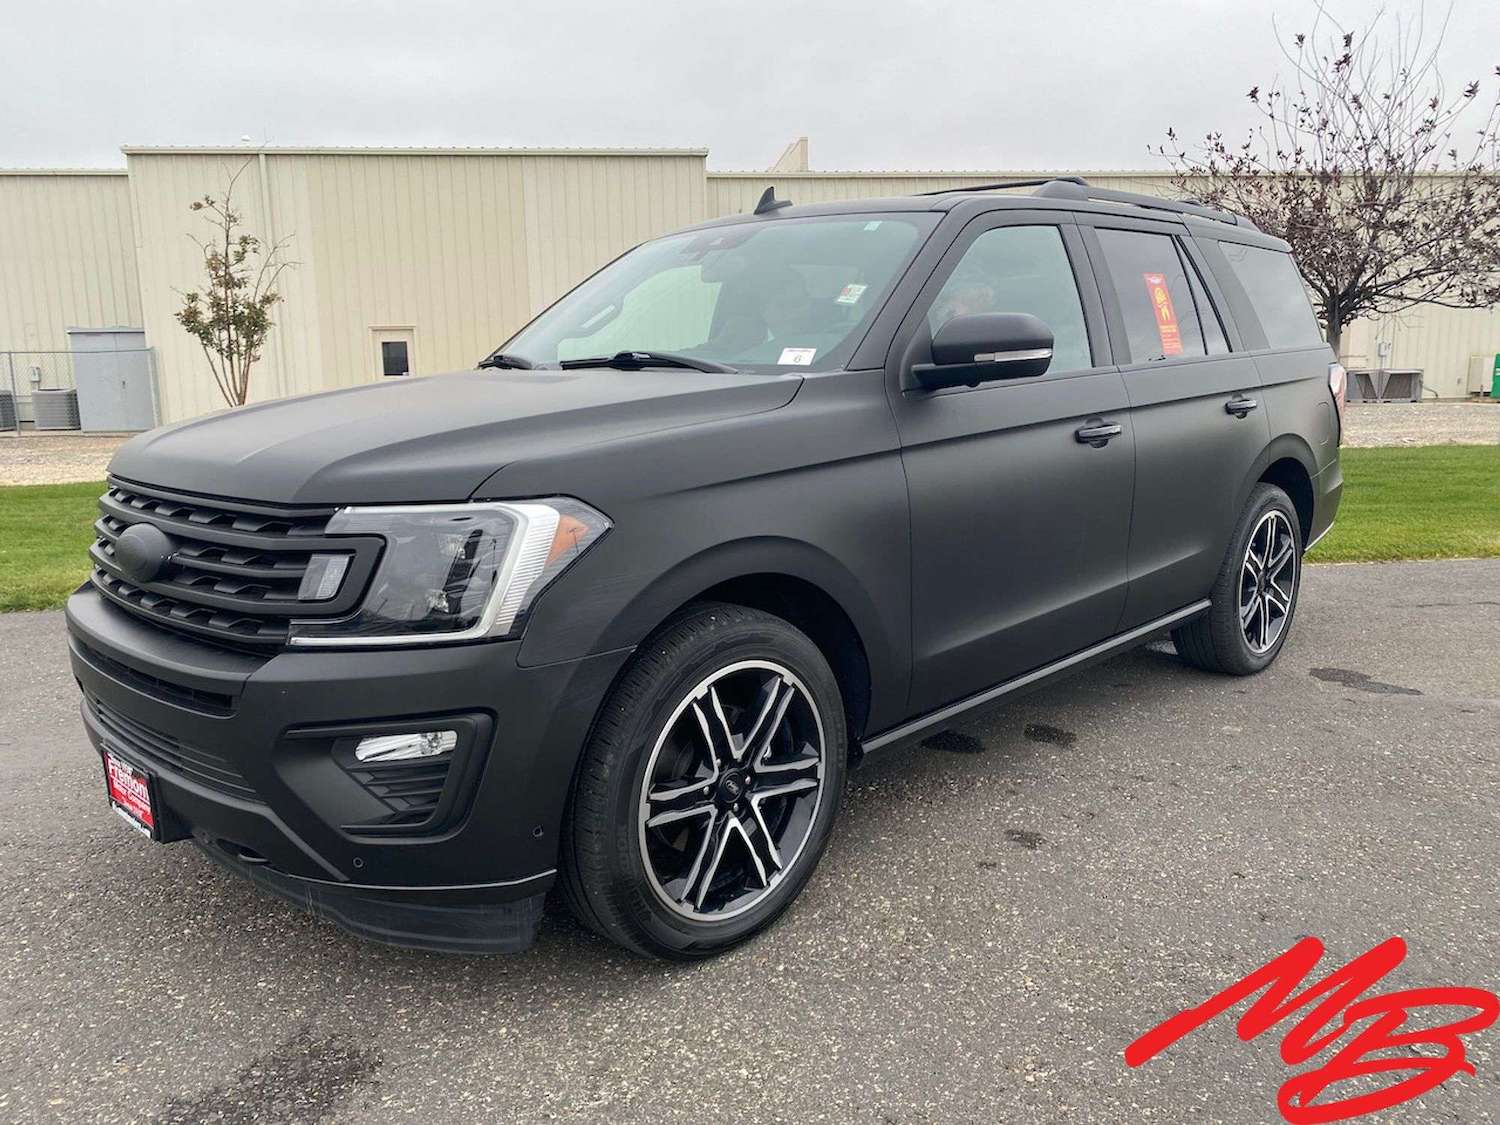 Kanye West's 2020 Ford Expedition Limited Stealth 4x4 SUV from Cody, Wyoming now on sale through Musser Bros.